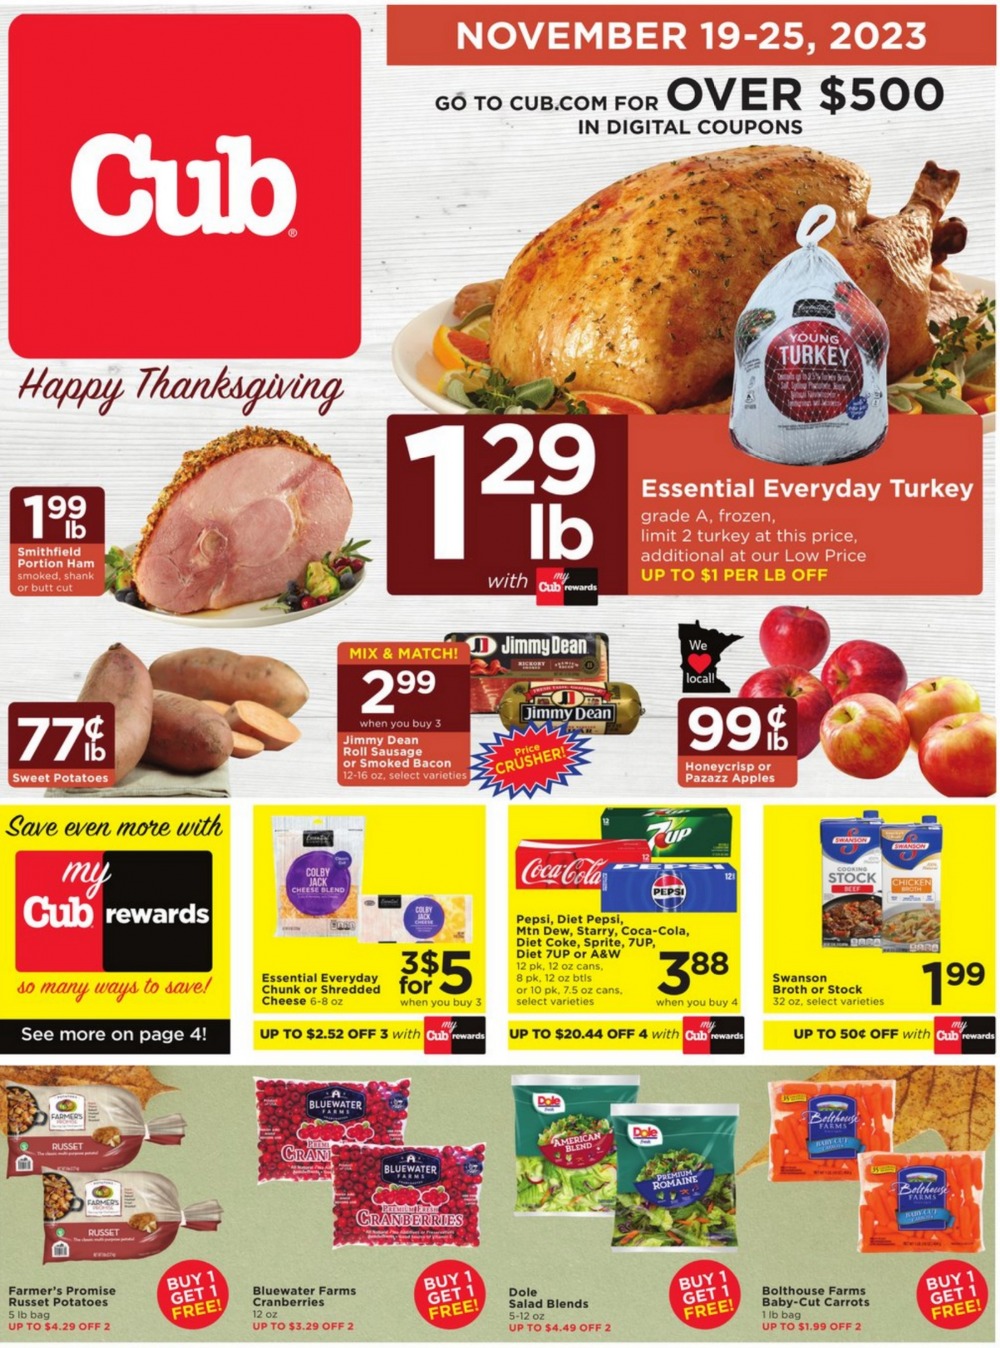 Cub Foods Weekly Ad December 3 to December 9, 2023 1 – cub foods ad 1 1